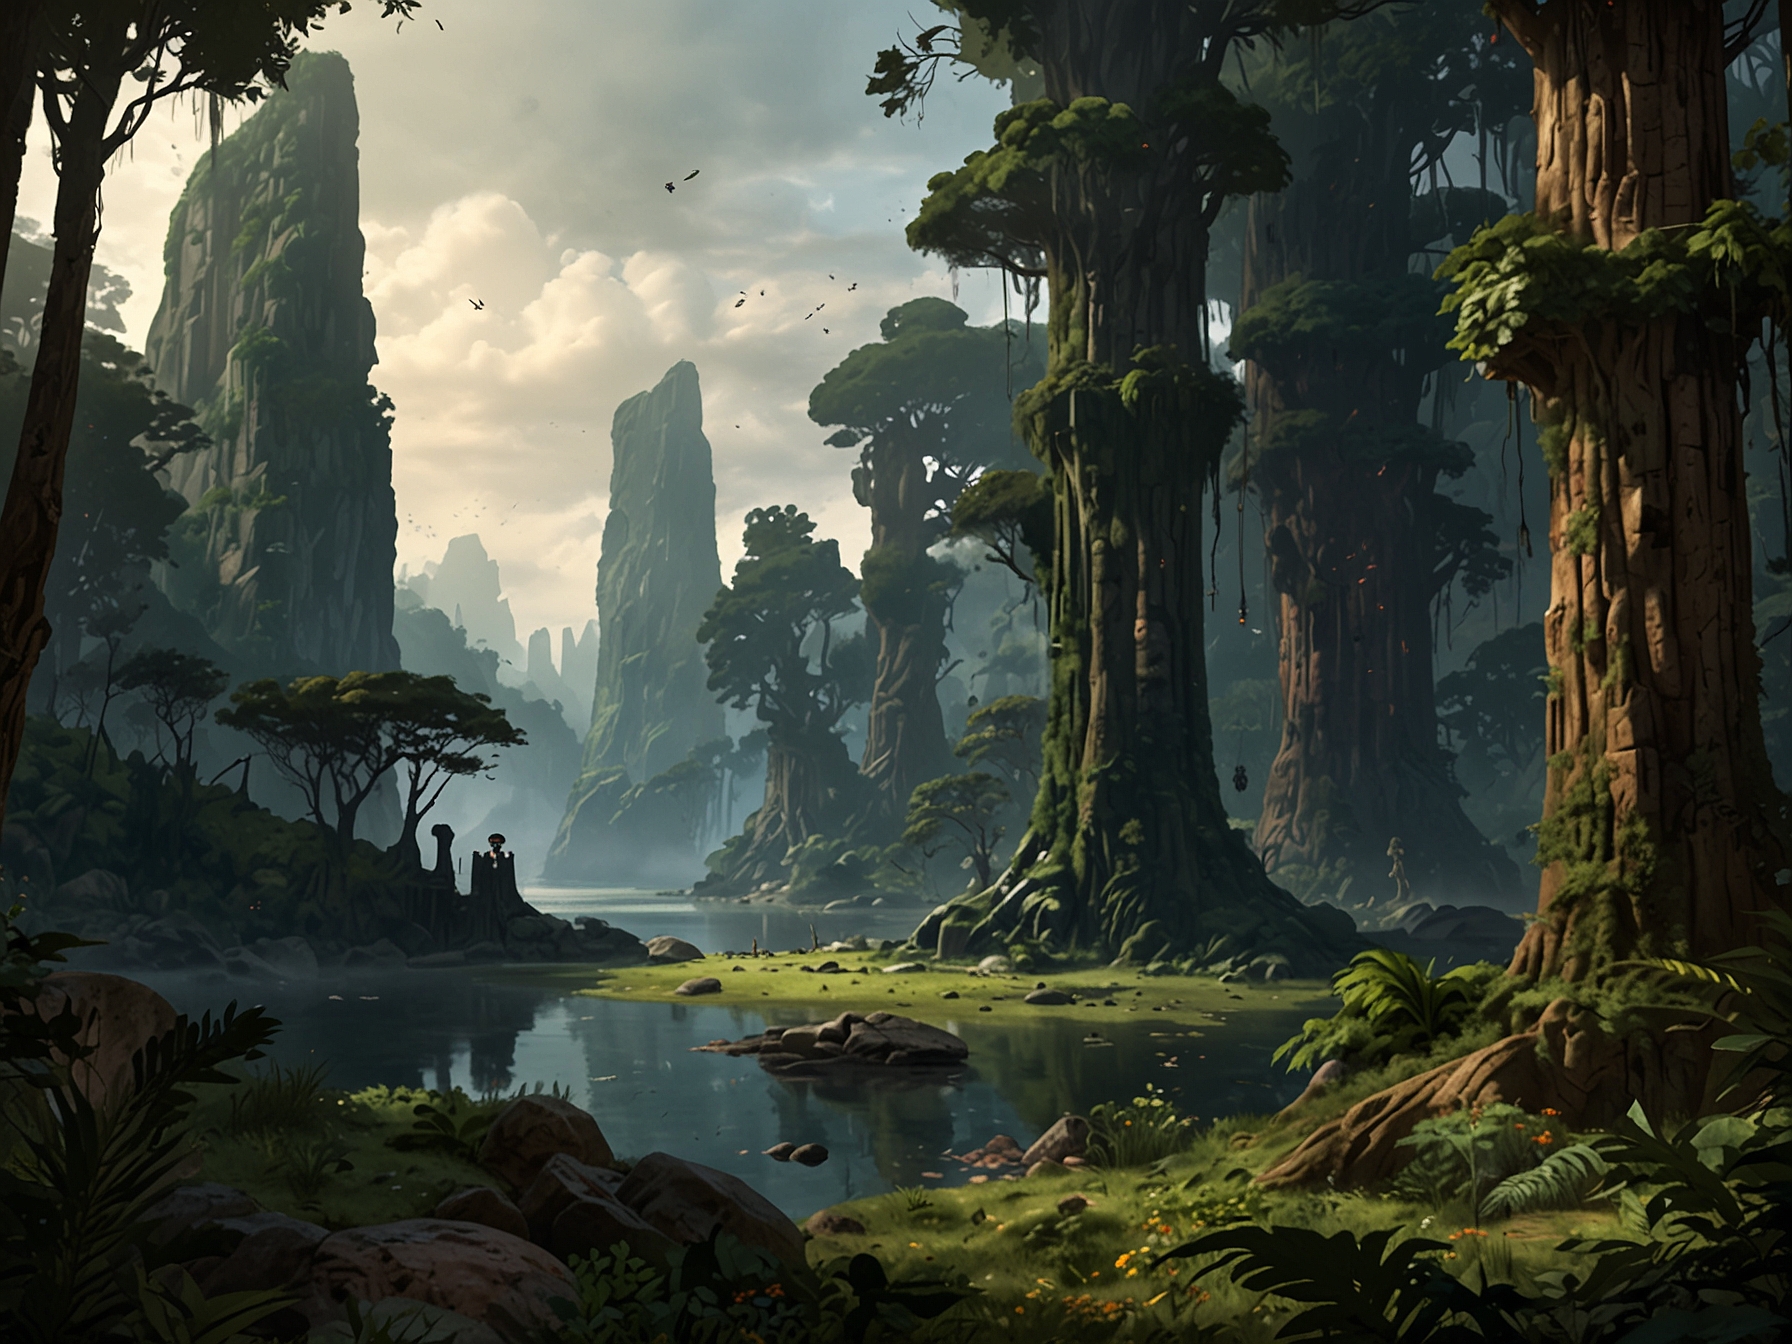 A vibrant environment concept of the planet Kashyyyk from 'Knights of the Old Republic,' capturing the rich and imaginative vision of the game's universe through John Gallagher's artistry.